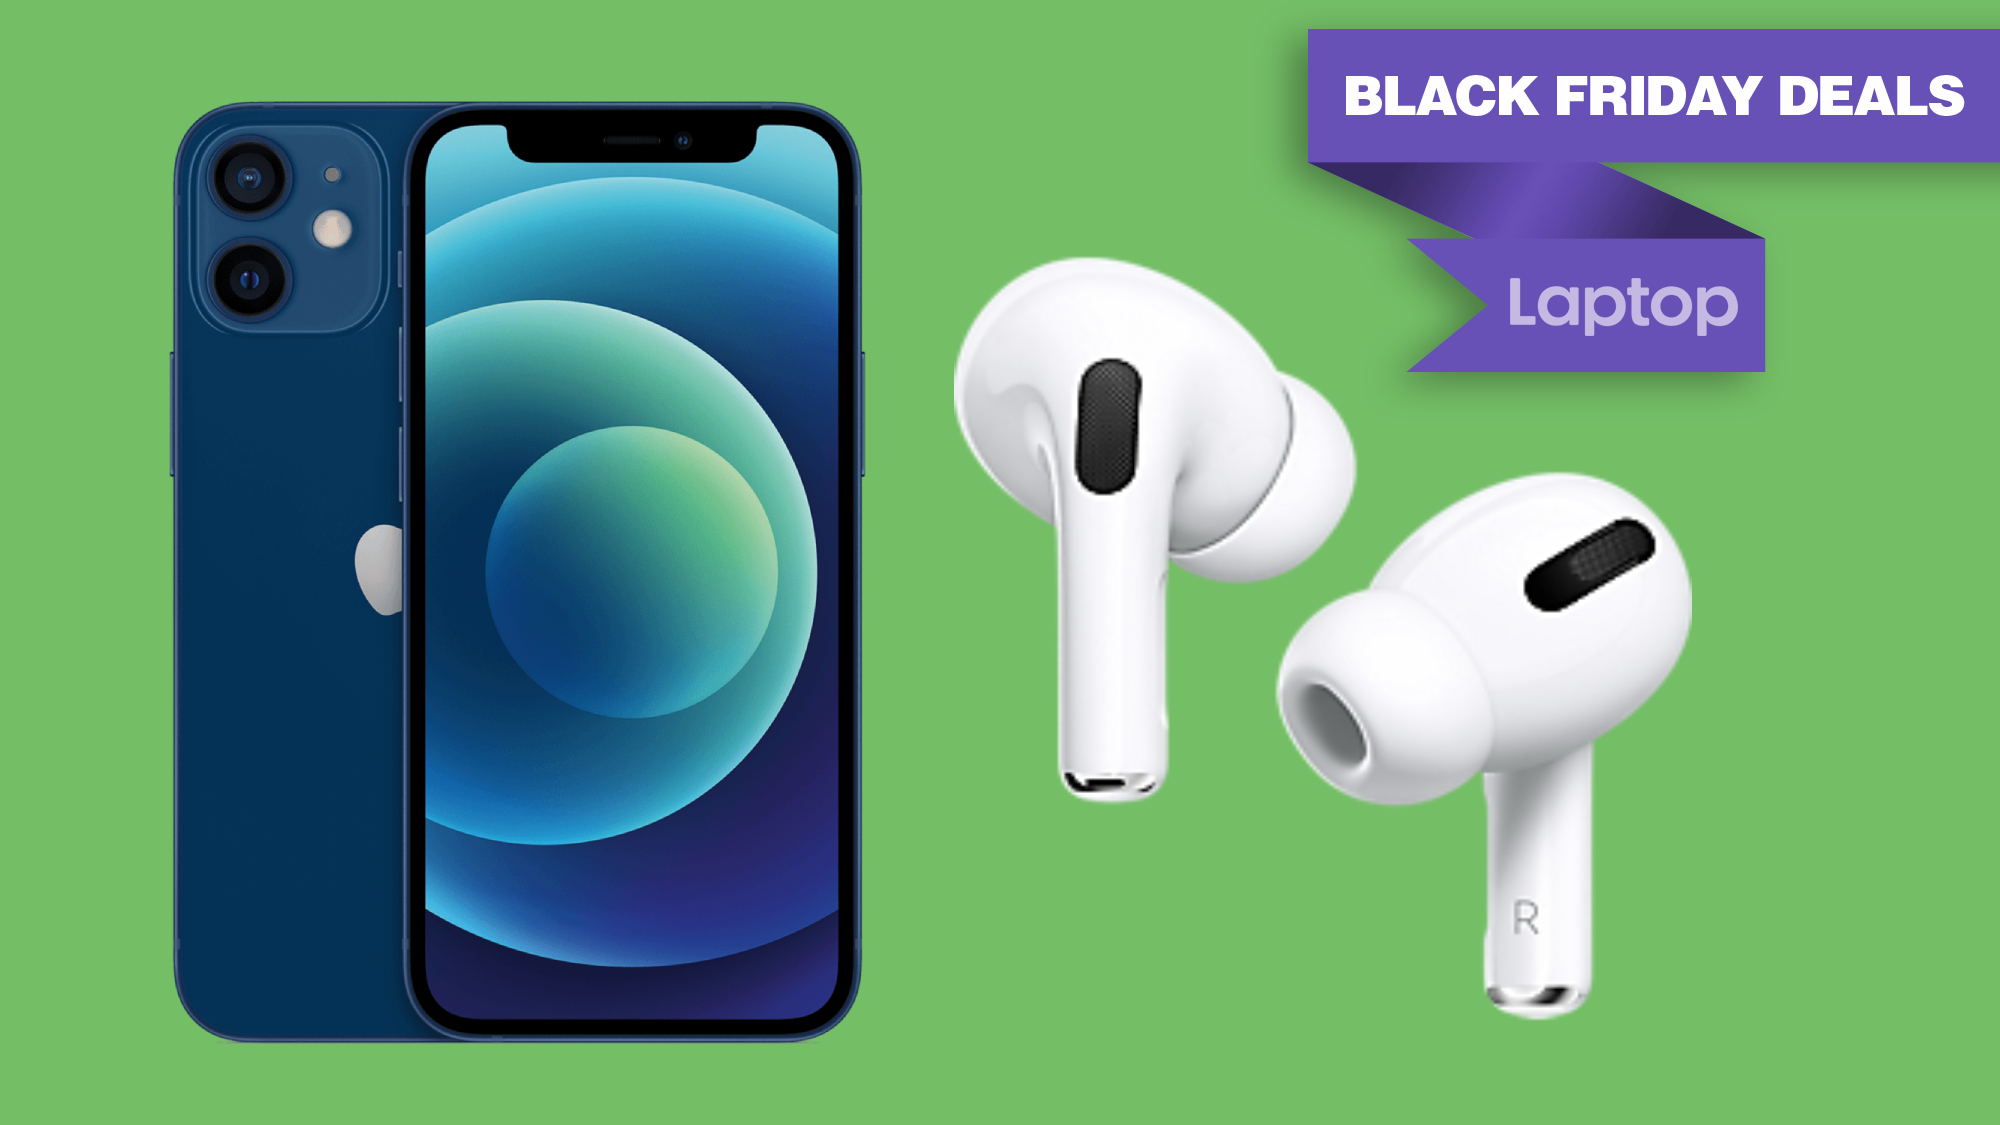 Black Friday AirPods Pro deal Get one FREE with iPhone 12 purchase at